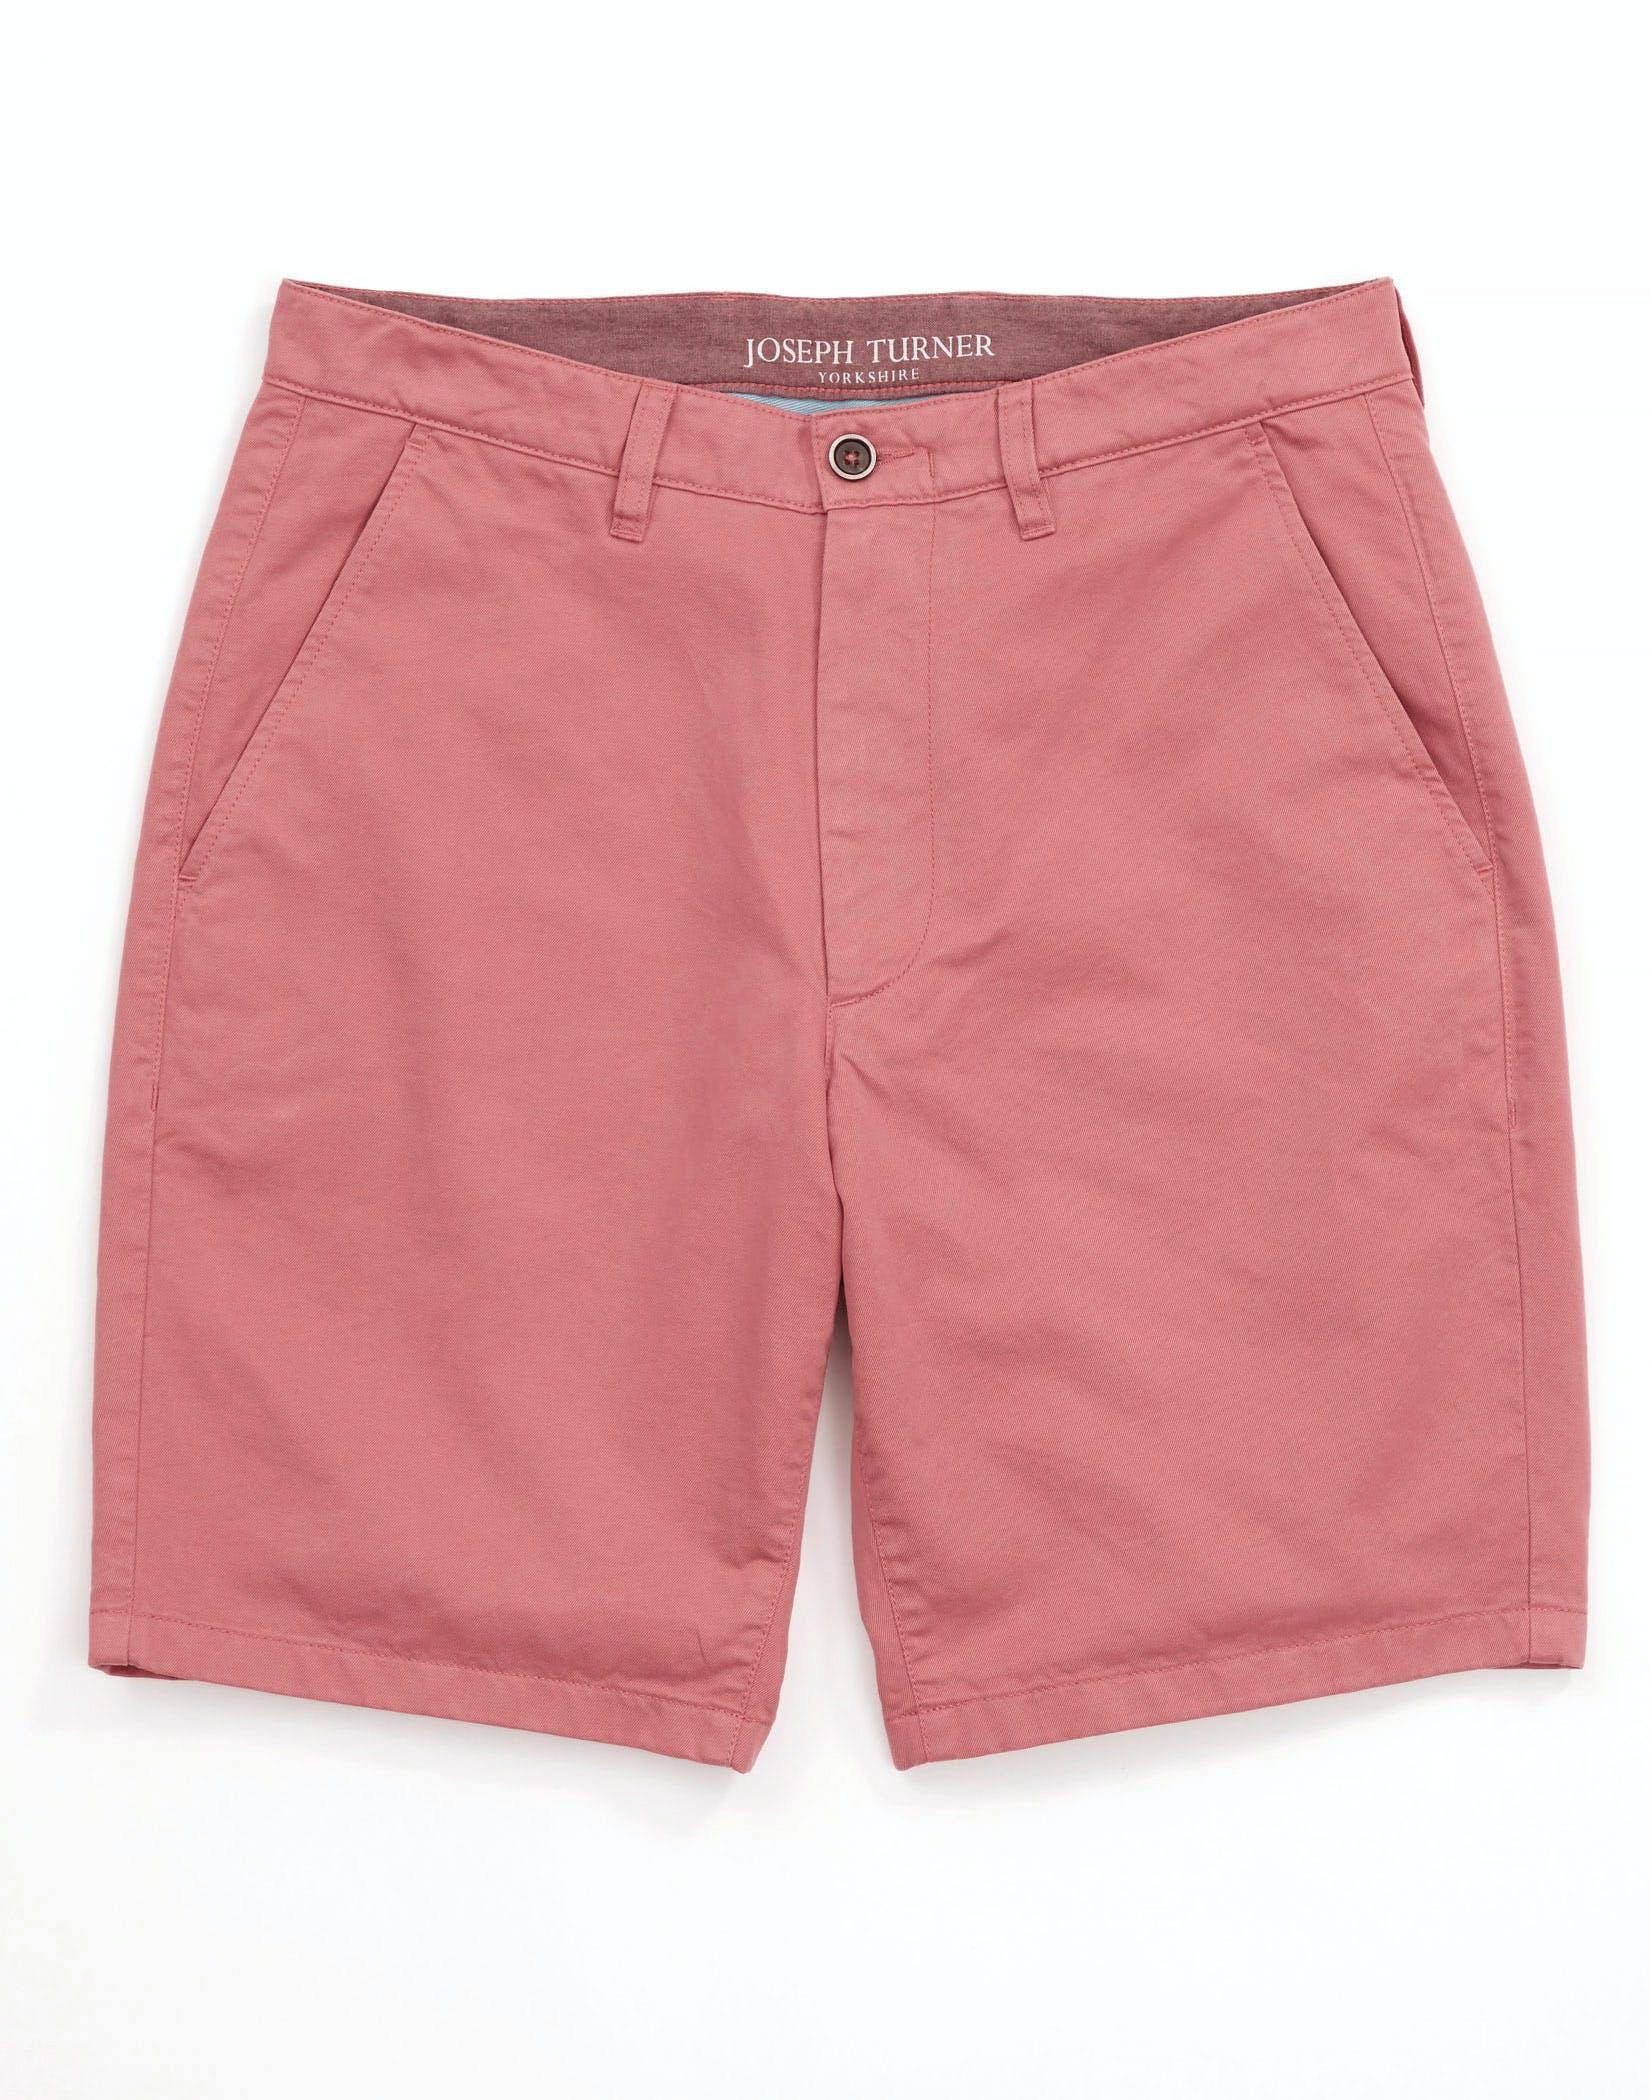 Flat Front Shorts - Dusty Pink